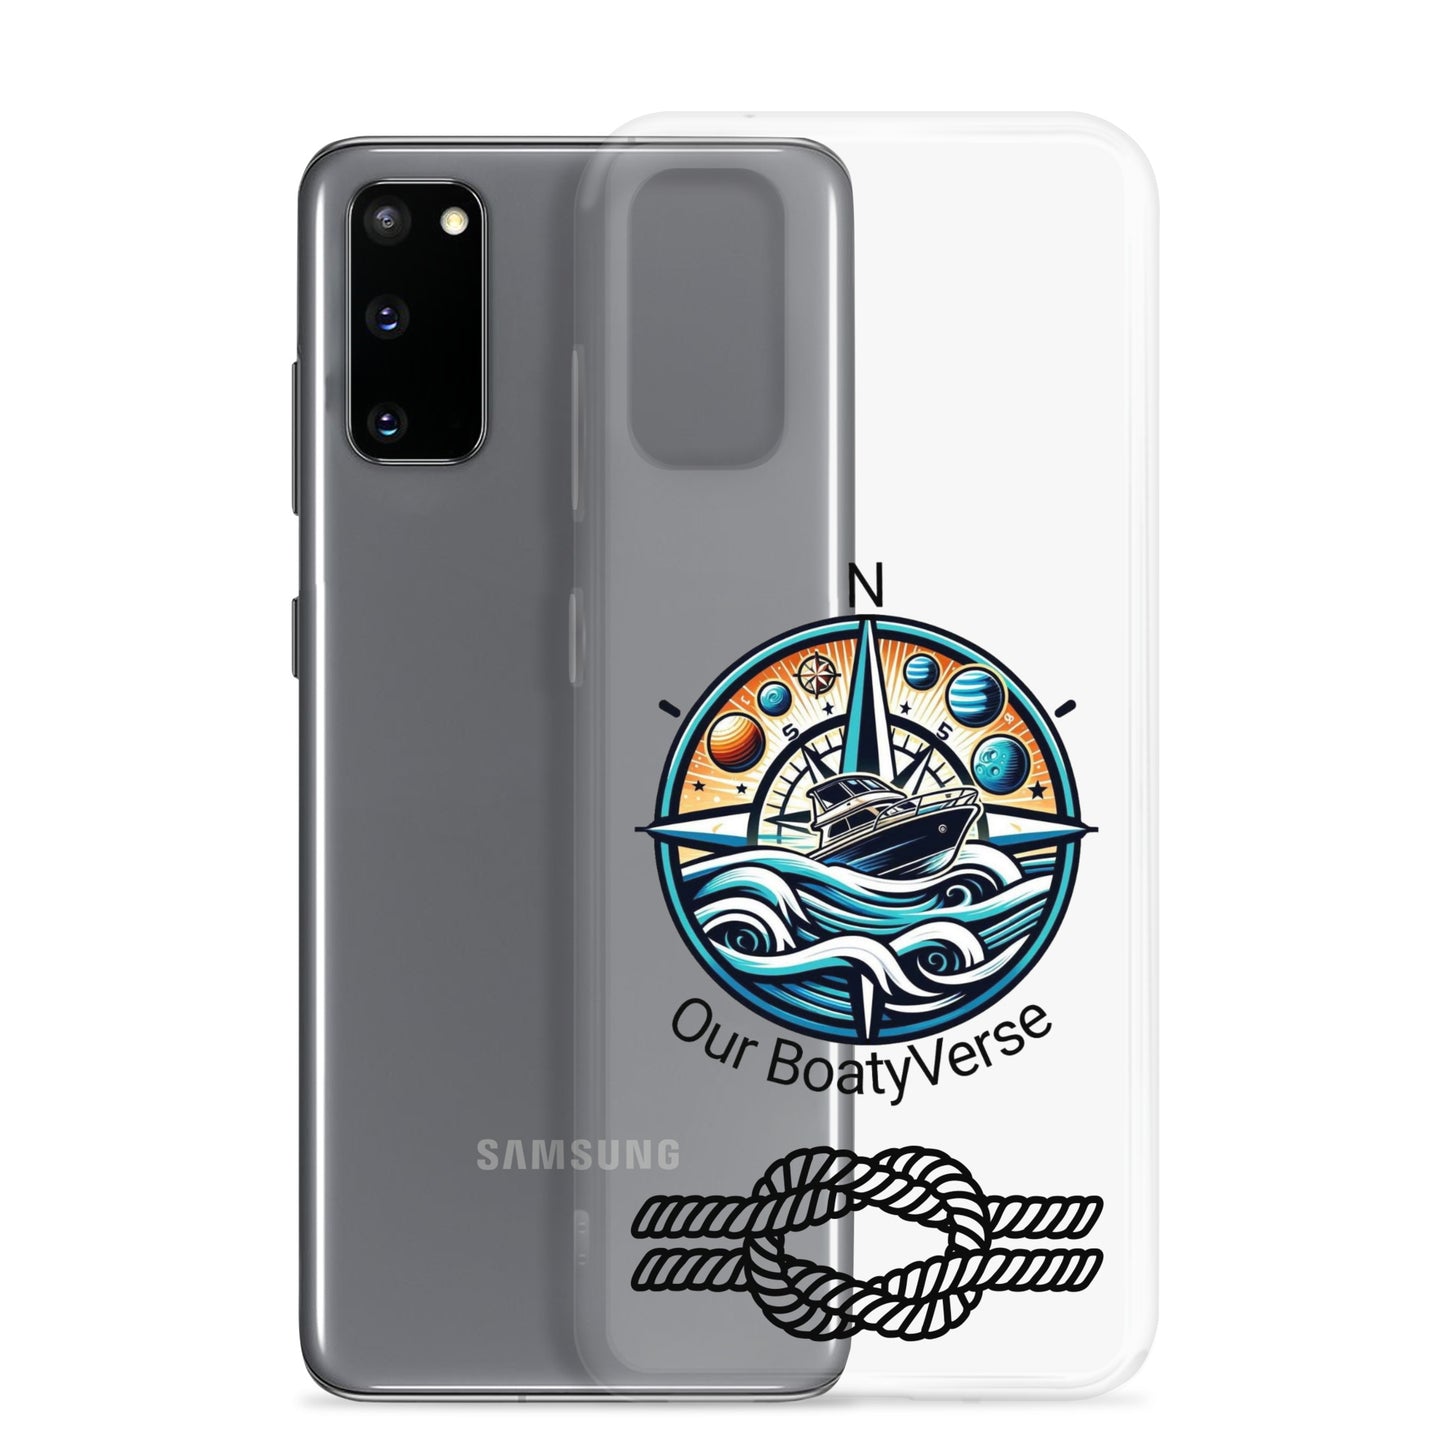 Stylish Clear Case for latest Samsung® phones by Our BoatyVerse